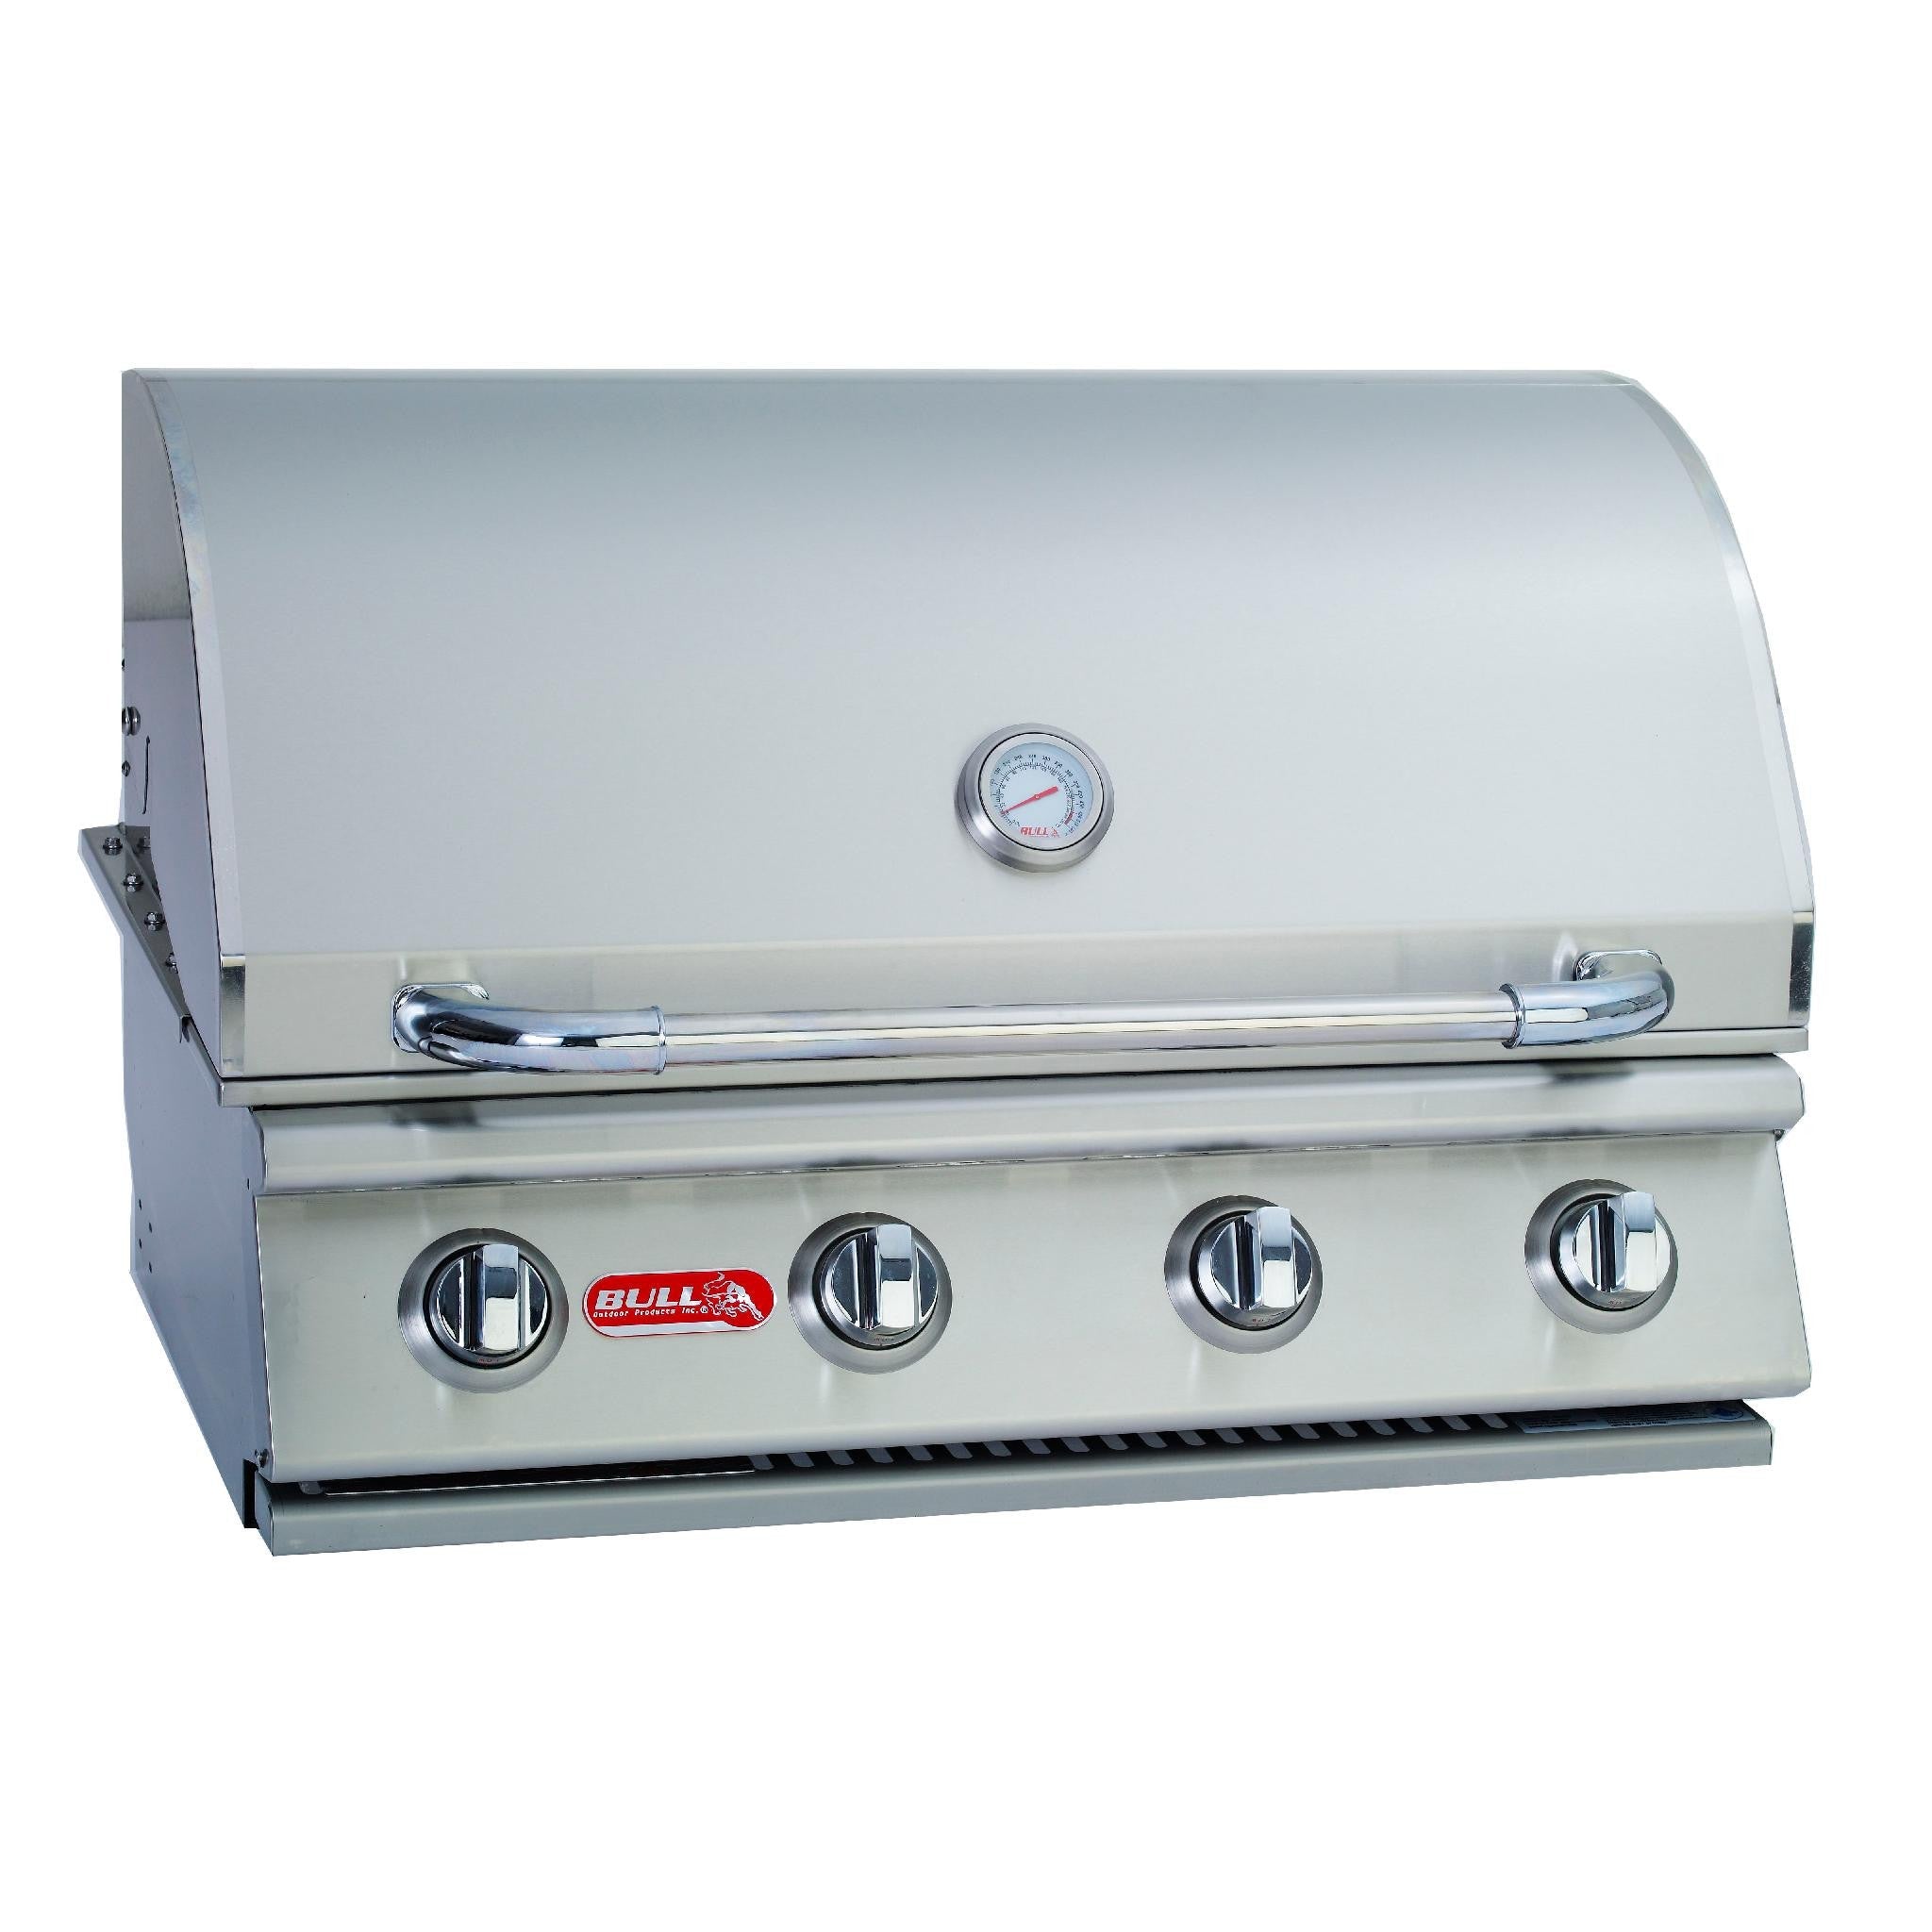 BullBull Outlaw 30-Inch Drop In Grill with Four Burners, 60,000 BTUs, Lights 26039- BetterPatio.com